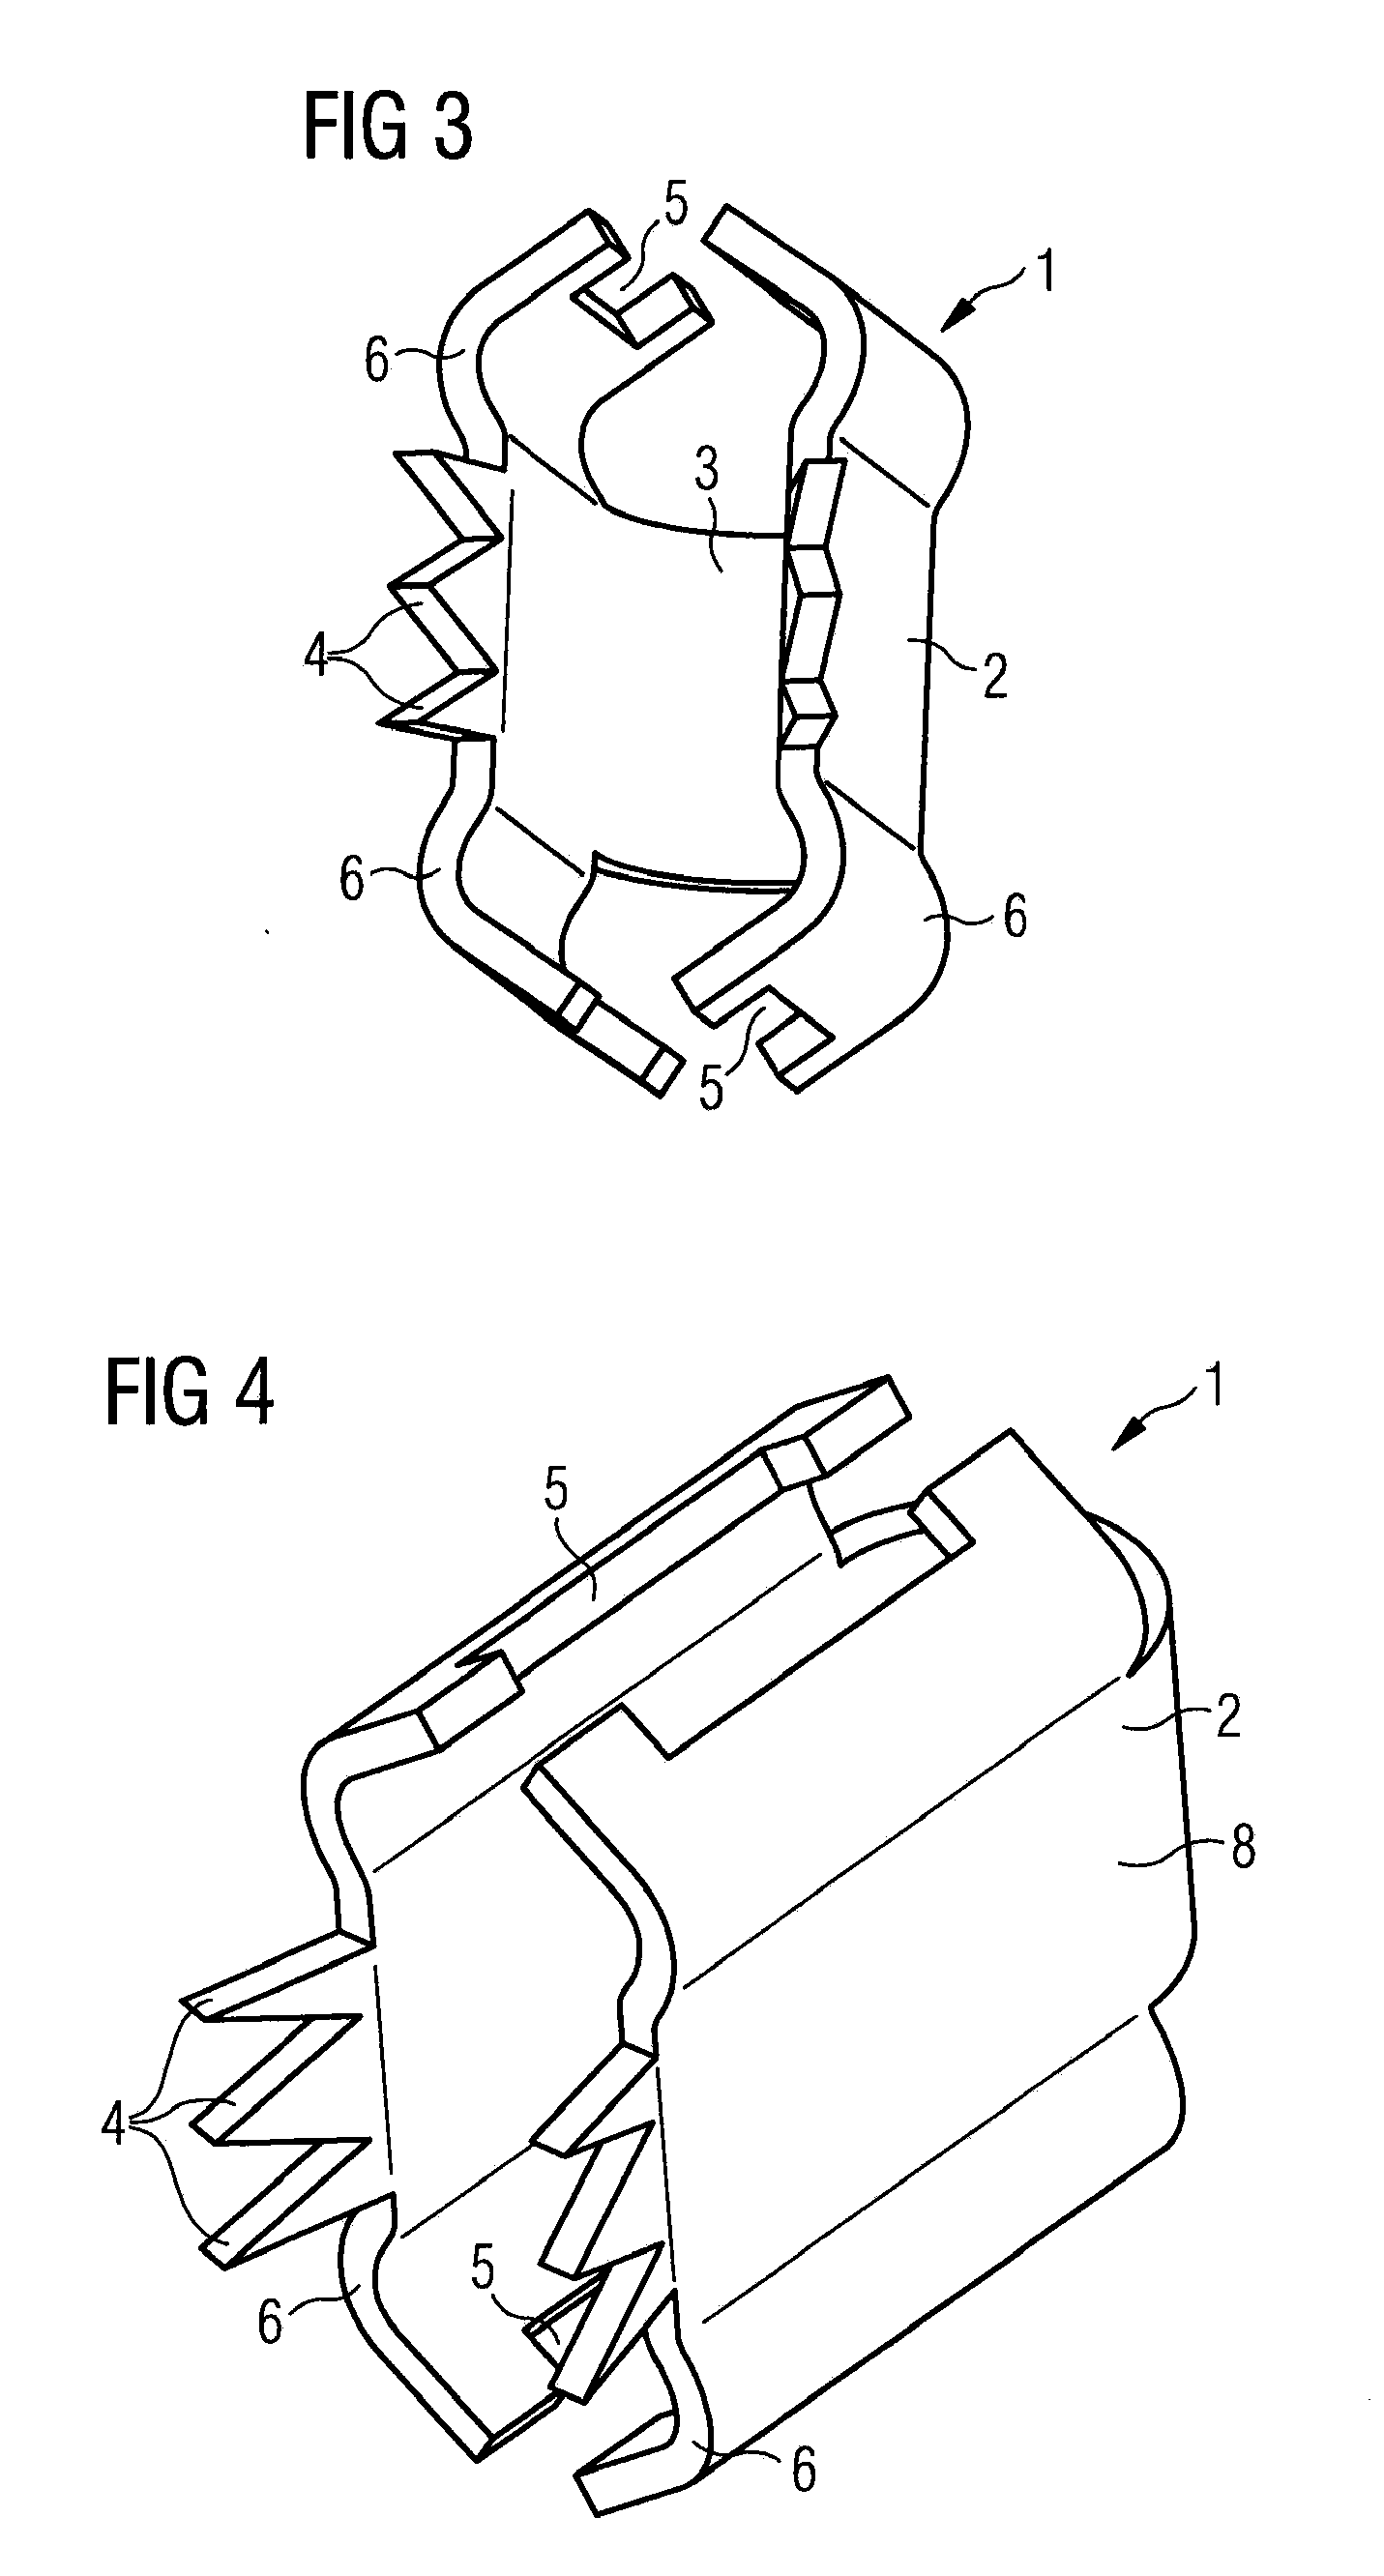 Clamping Element